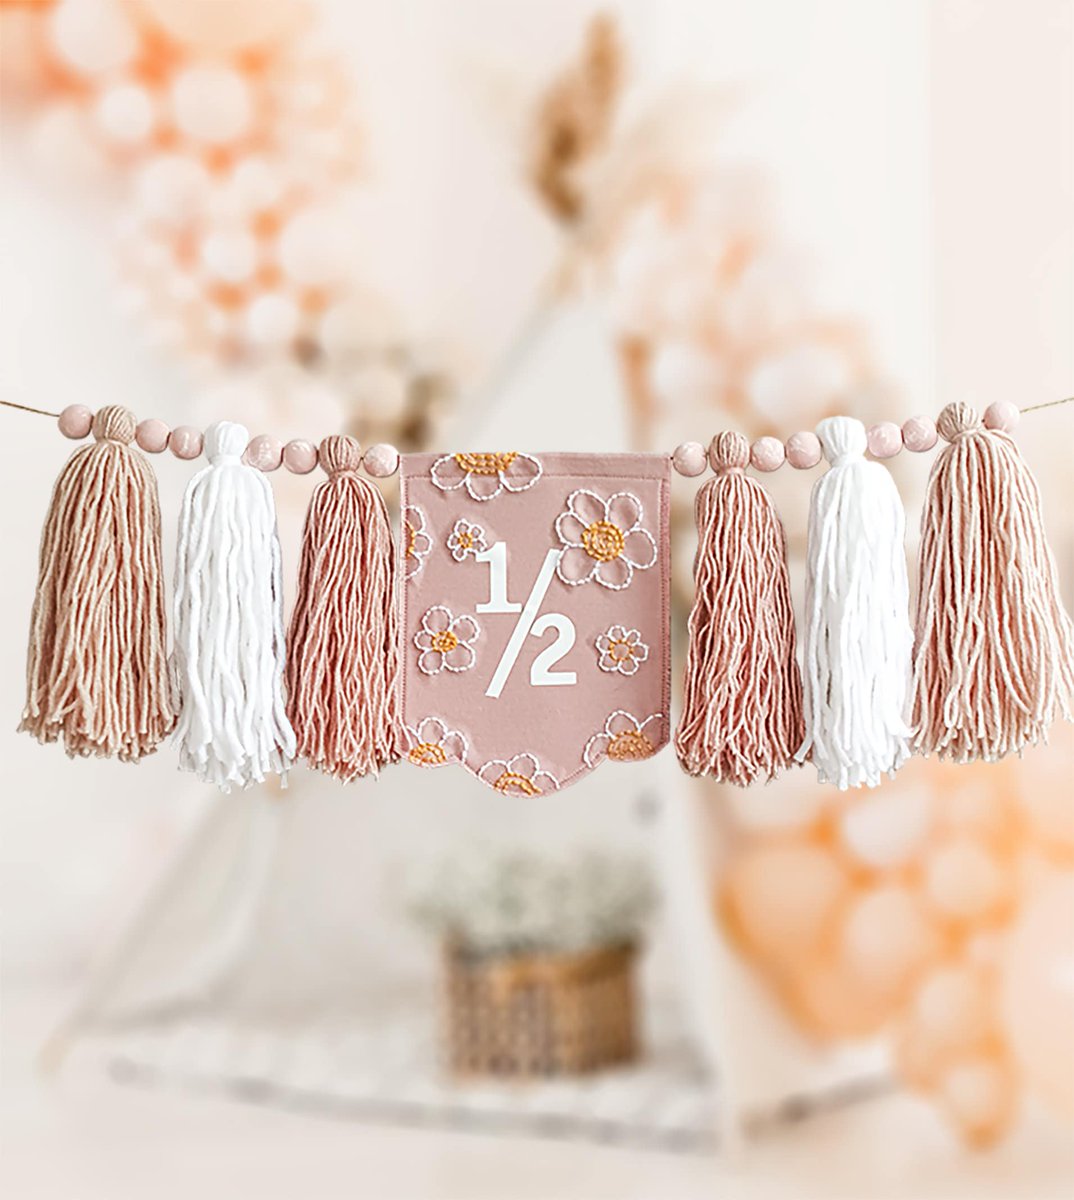 Excited to share the latest addition to my #etsy shop: Highchair daisy banner for half birthday girl Personalized highchair banner birthday Baby high chair Daisy high chair garland etsy.me/44YYljl #pink #birthday #white #halfbirthday #daisybanner #blushpink